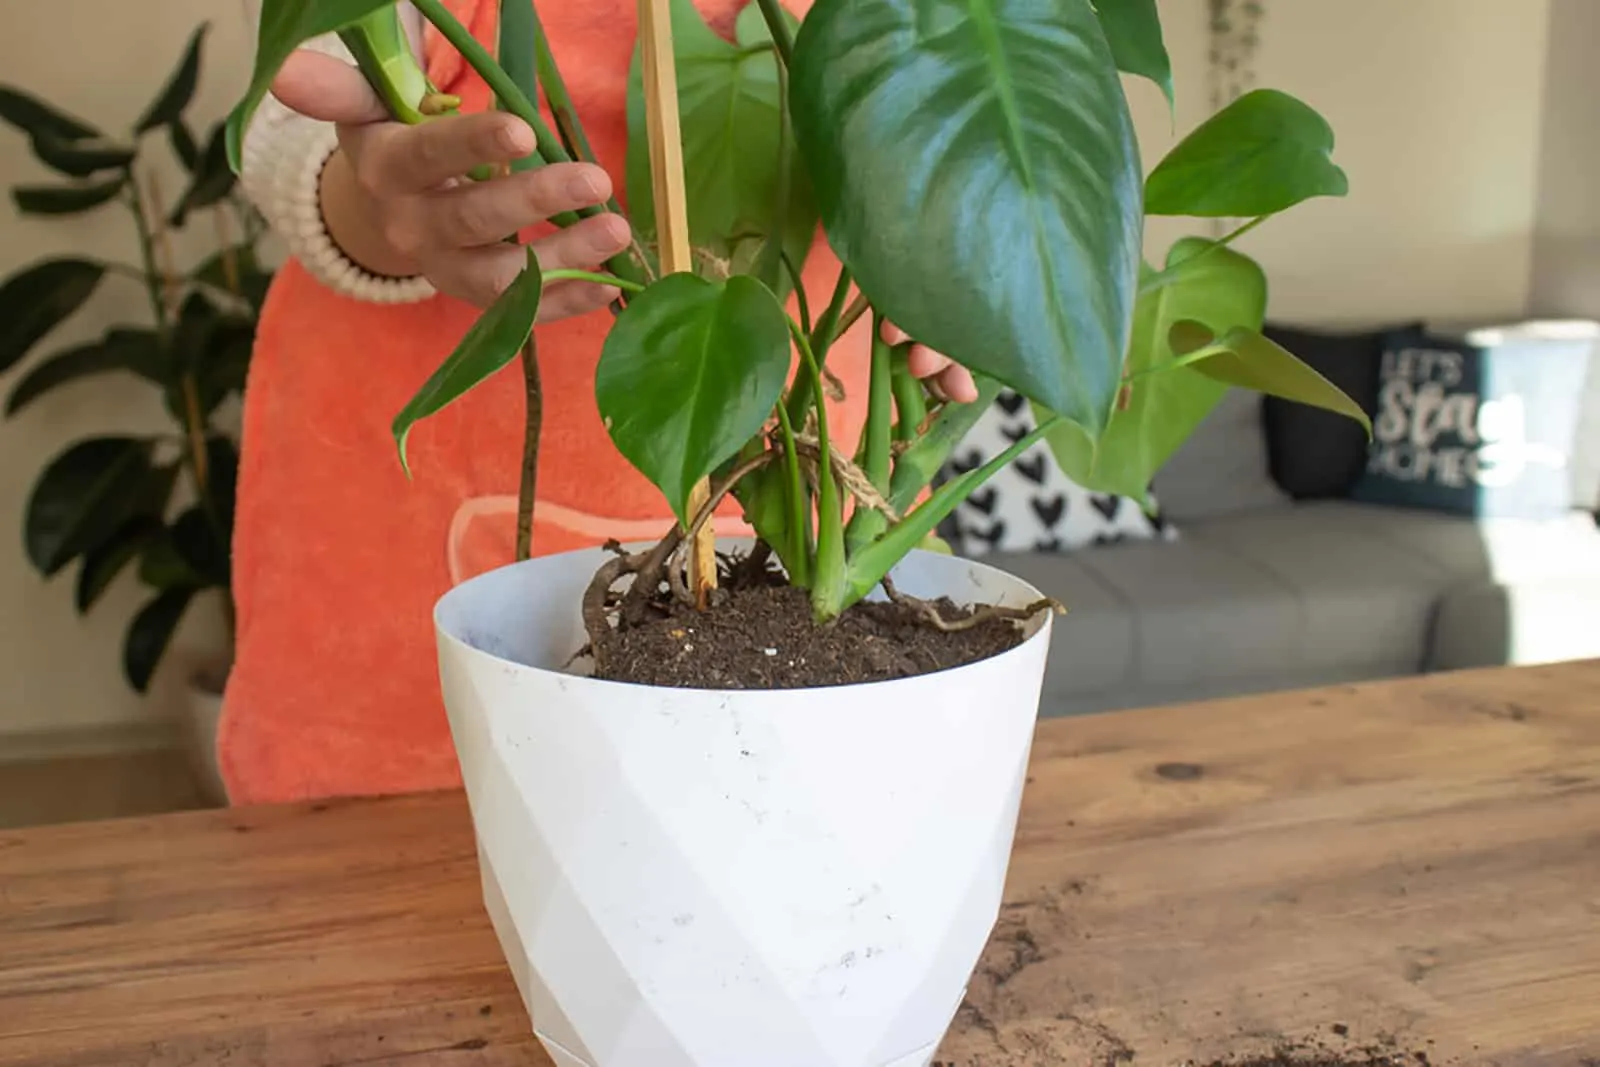 Woman taking care of home plant monstera